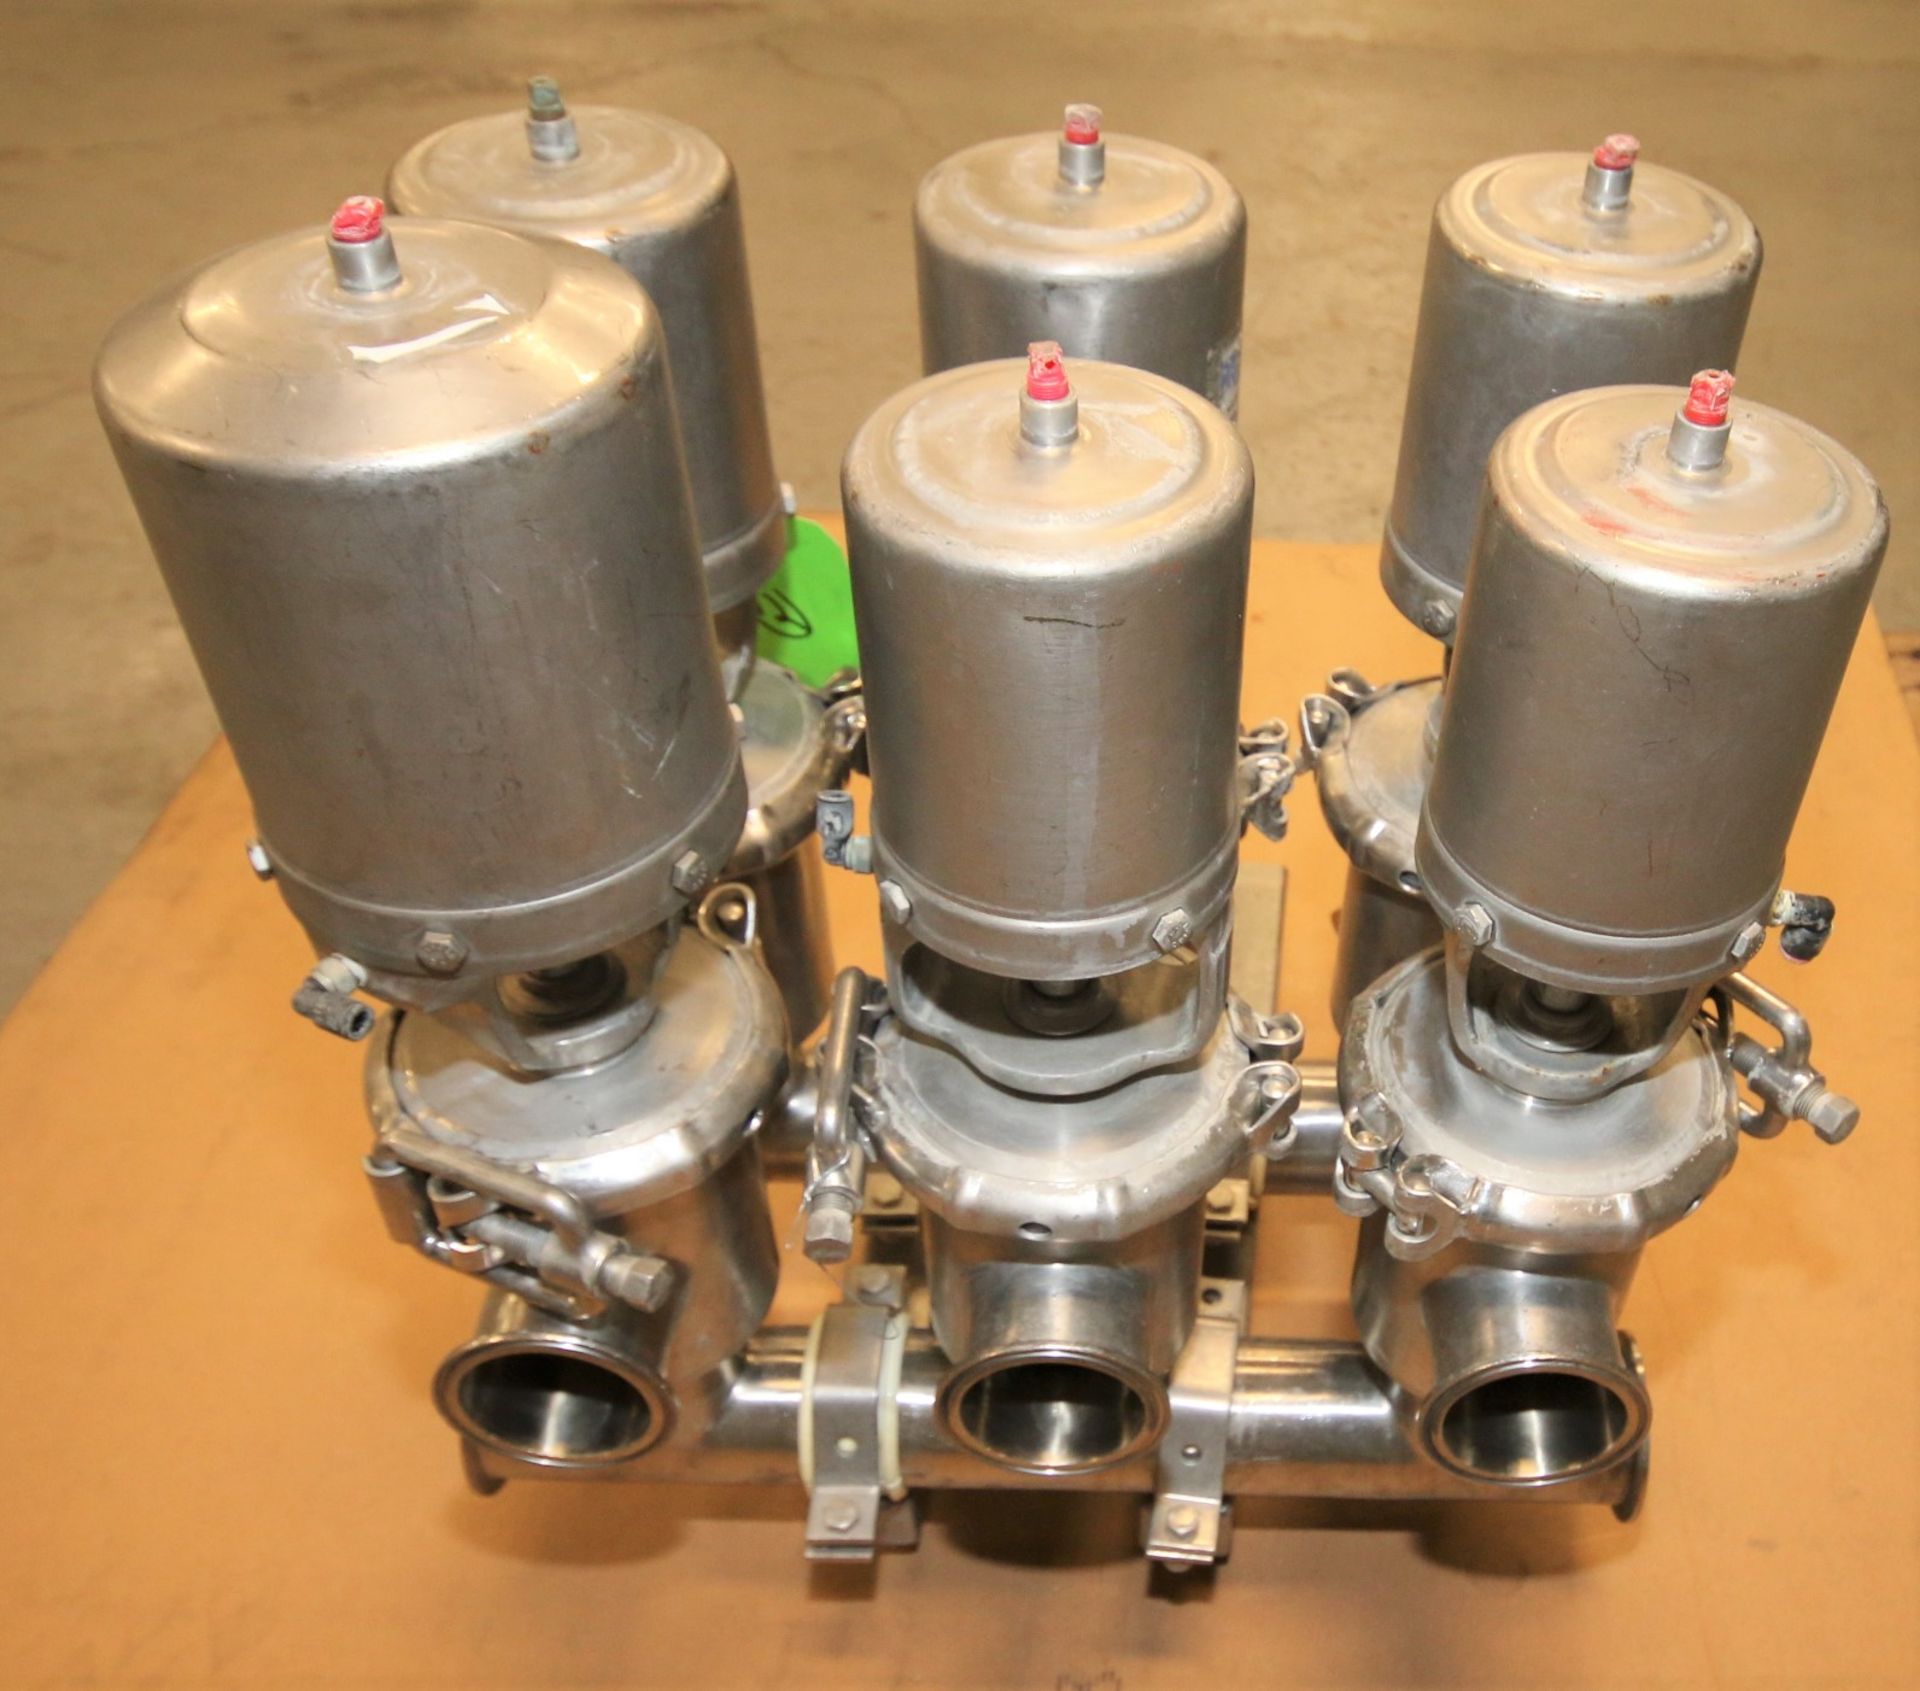 6-Valve WCB 2-1/2" S/S Air Valve Manifold / Cluster with Model 61C Valves - Image 3 of 4